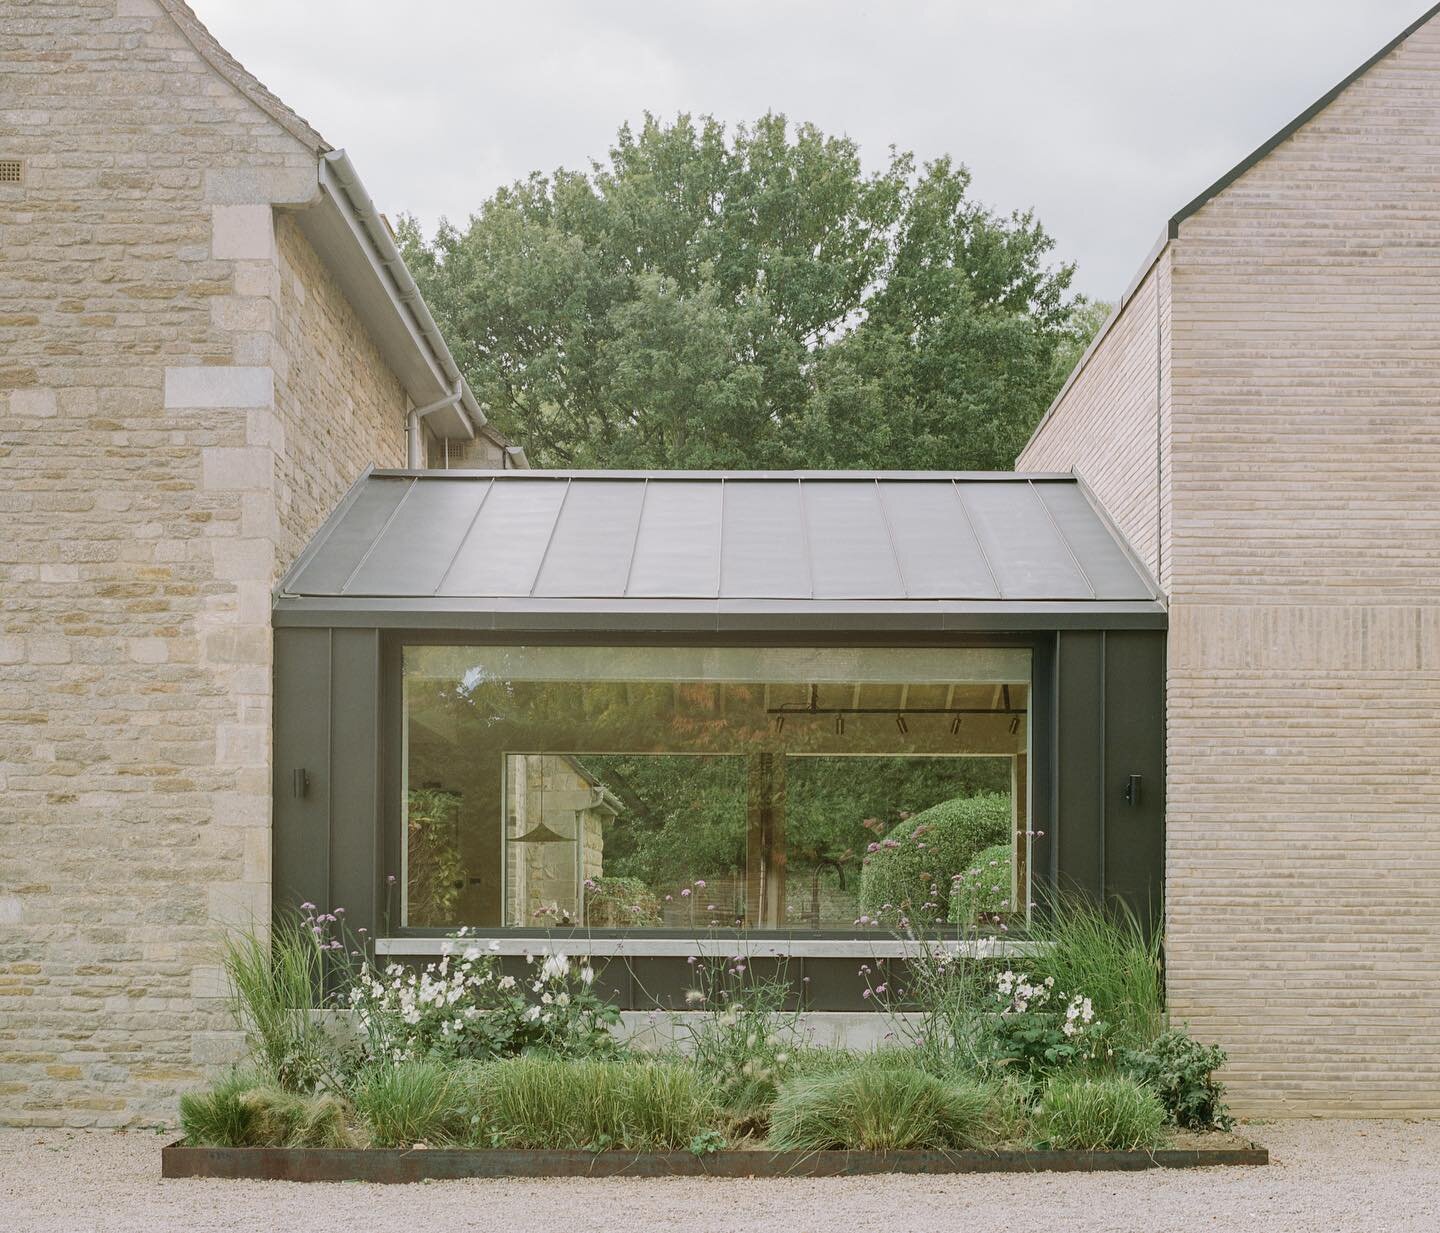 The link between the old stone house and the new brick extension is clad in metal and houses the main kitchen space. 

Our approach was to design a series of gabled additions that related closely to the original house in terms of form, scale, proport